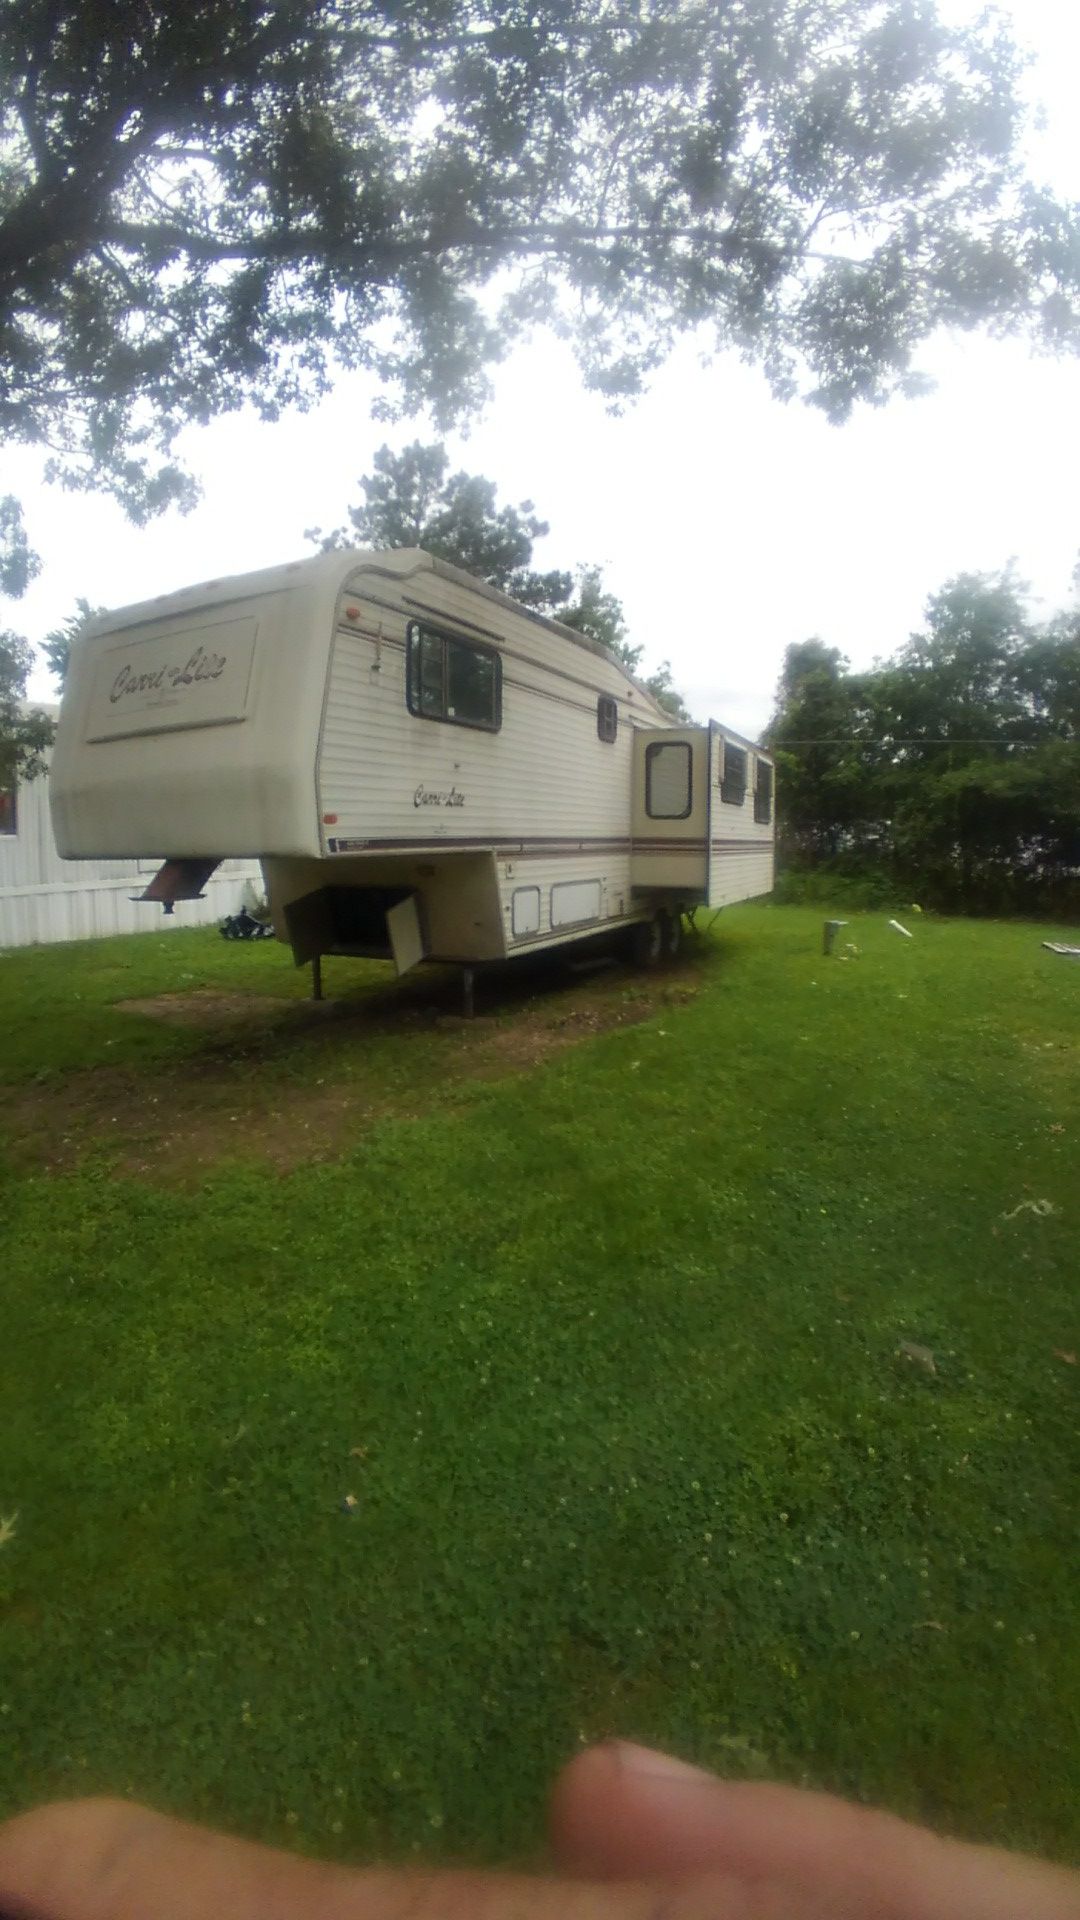 Carri lite 5th wheel rv for Sale in New Caney, TX - OfferUp